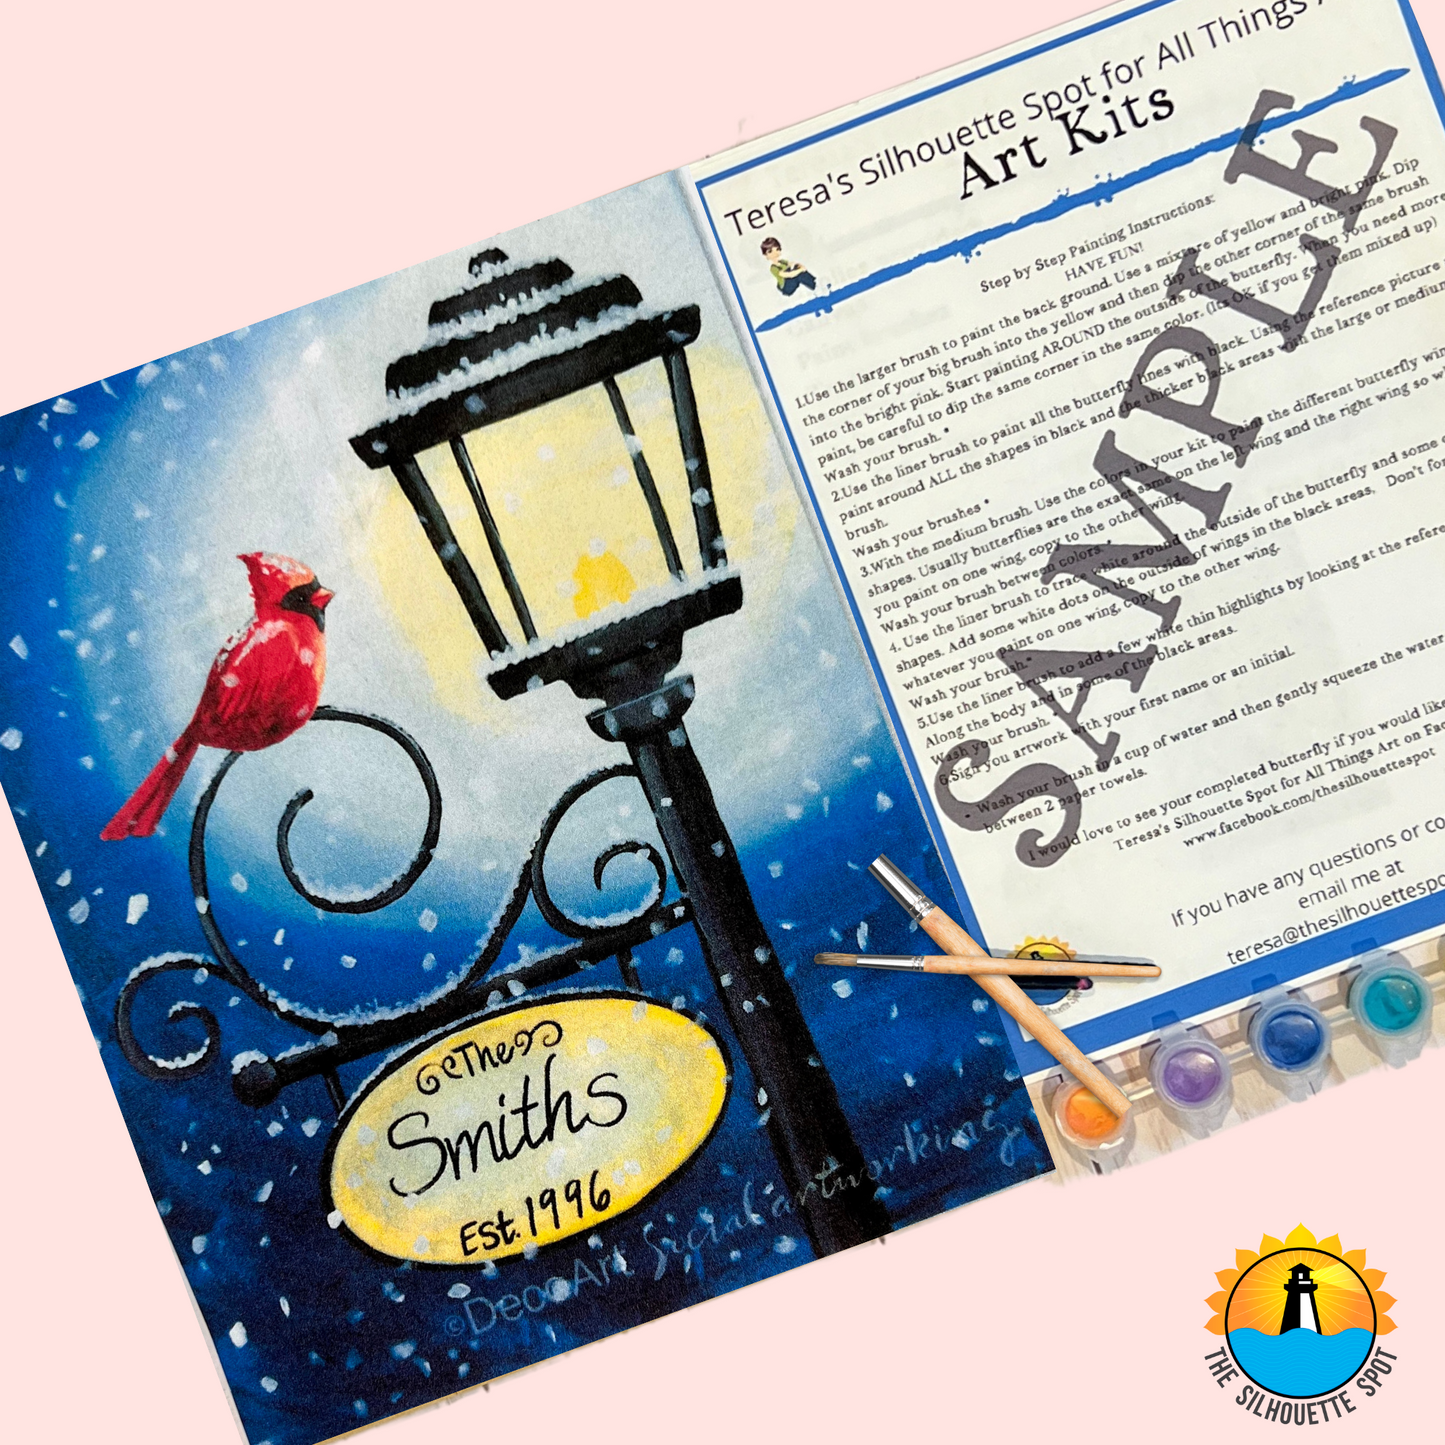 Winter Cardinal Complete Art Party Kits